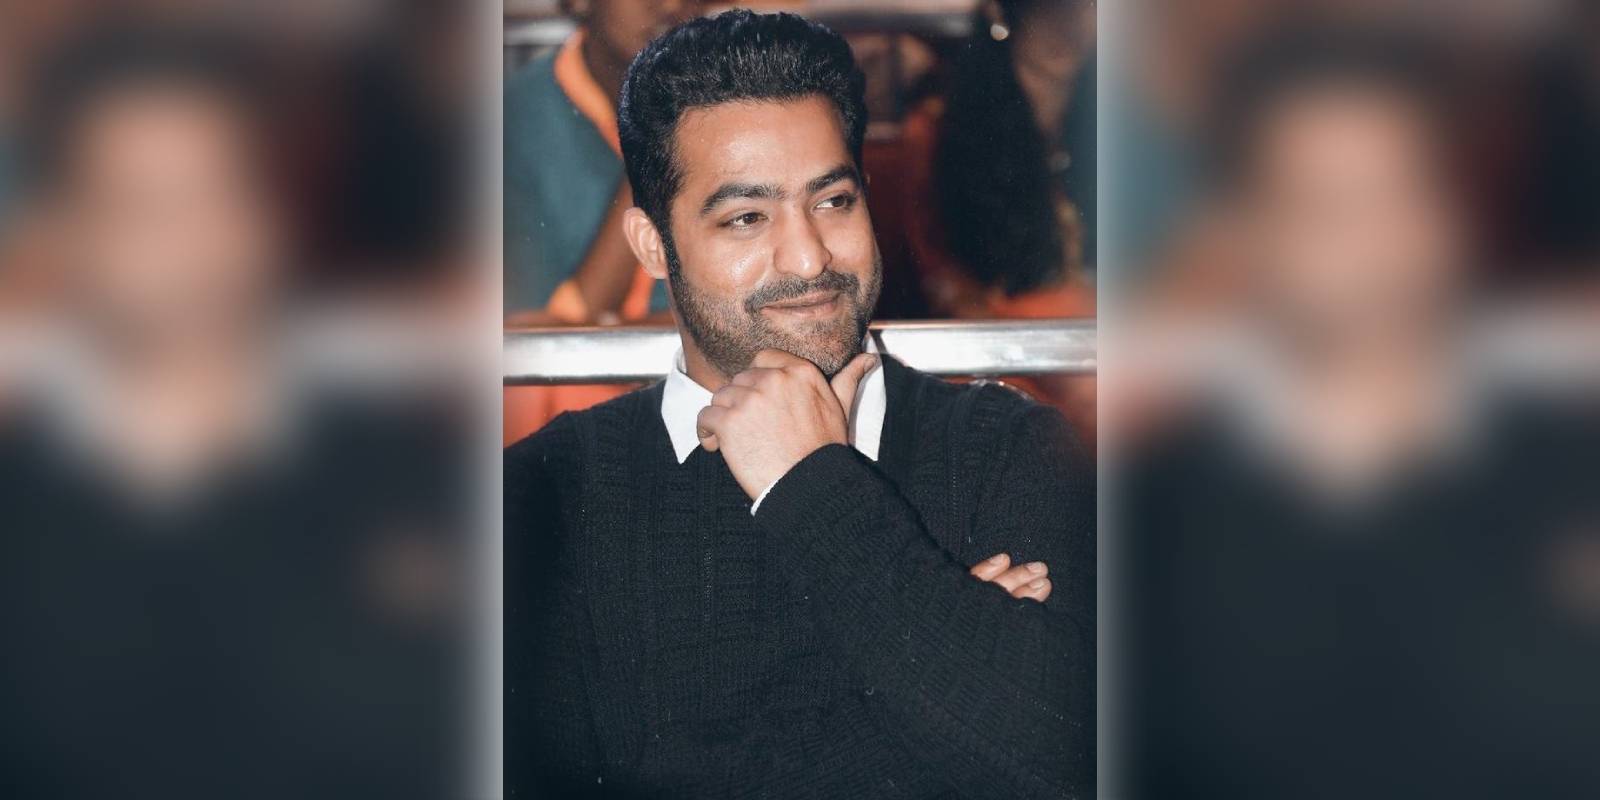 War 2: Ahead of Bollywood debut, Jr NTR shifts his focus to branding strategy